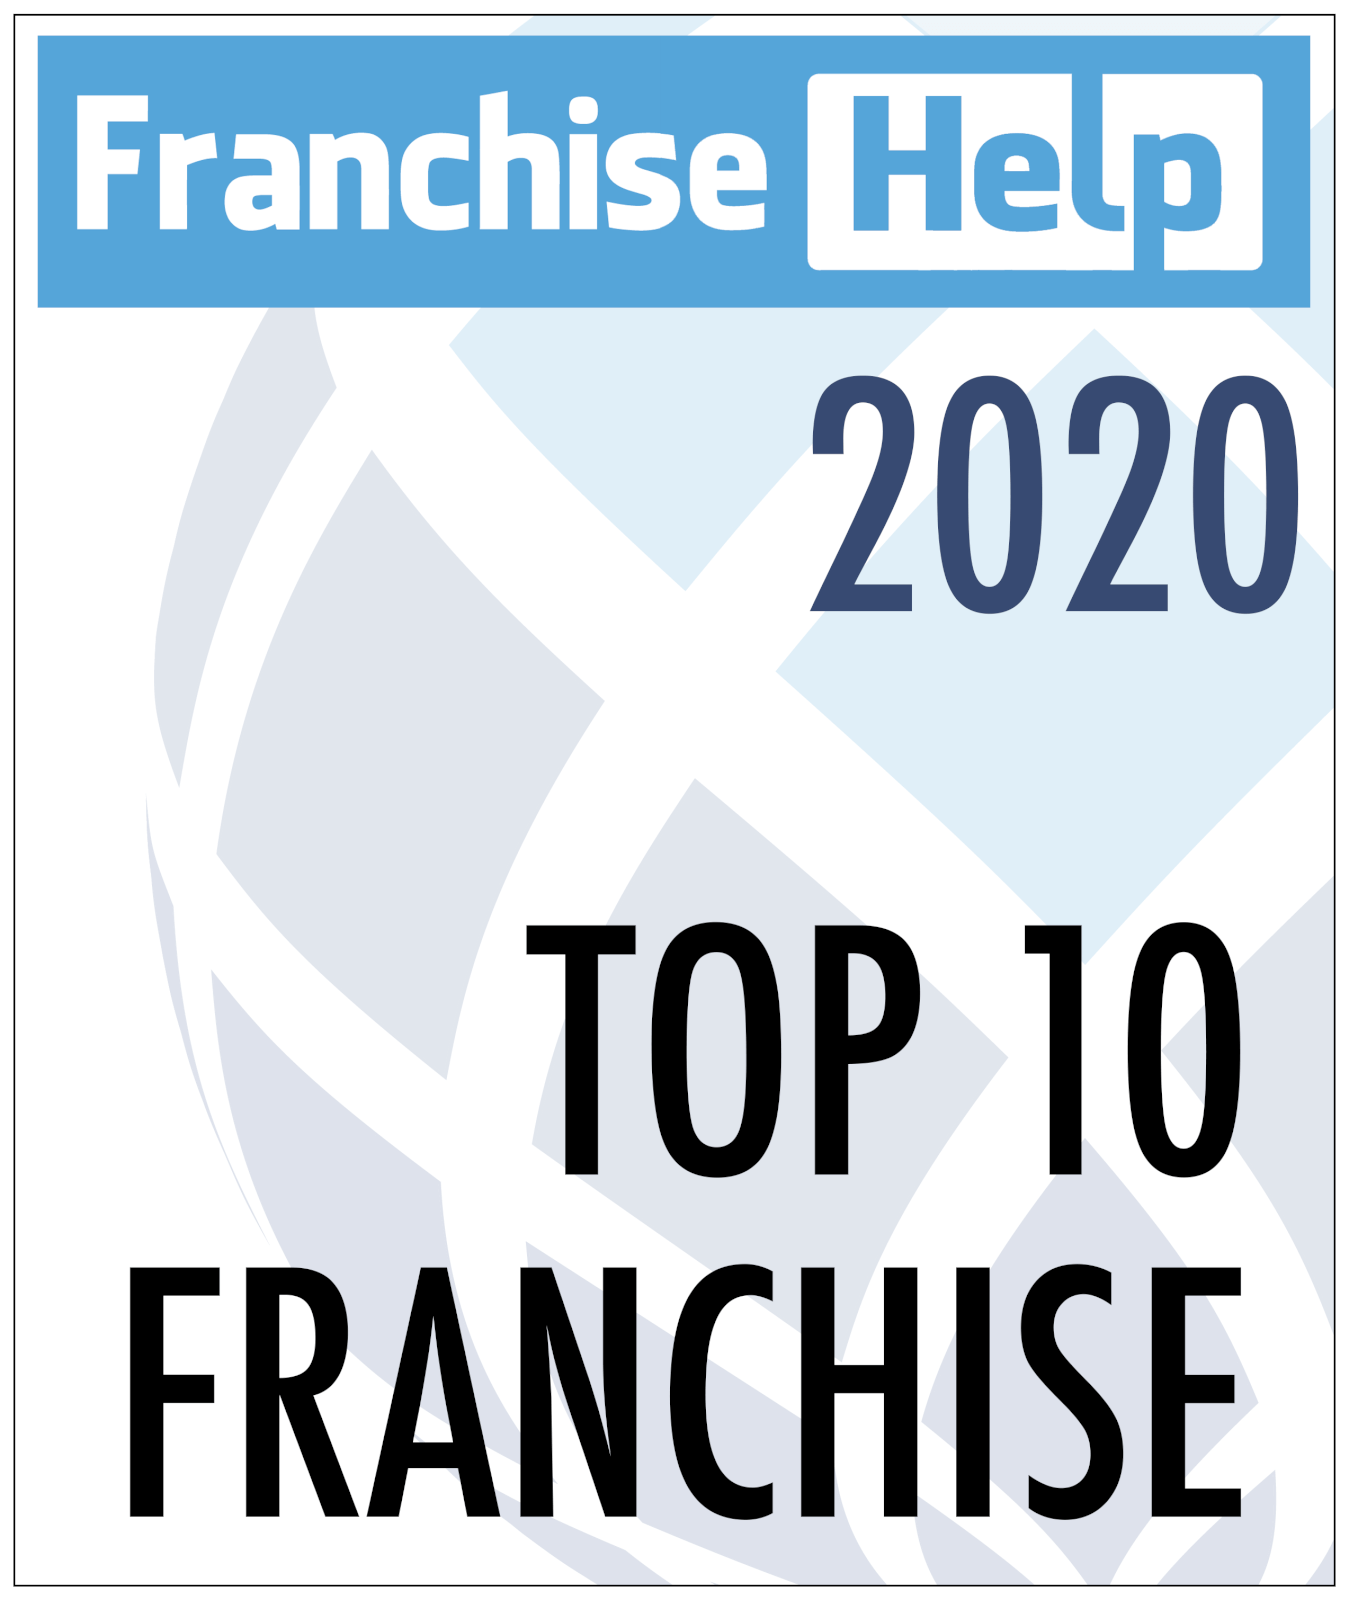 N-Hance ranked among Top 10 Franchises in 2020